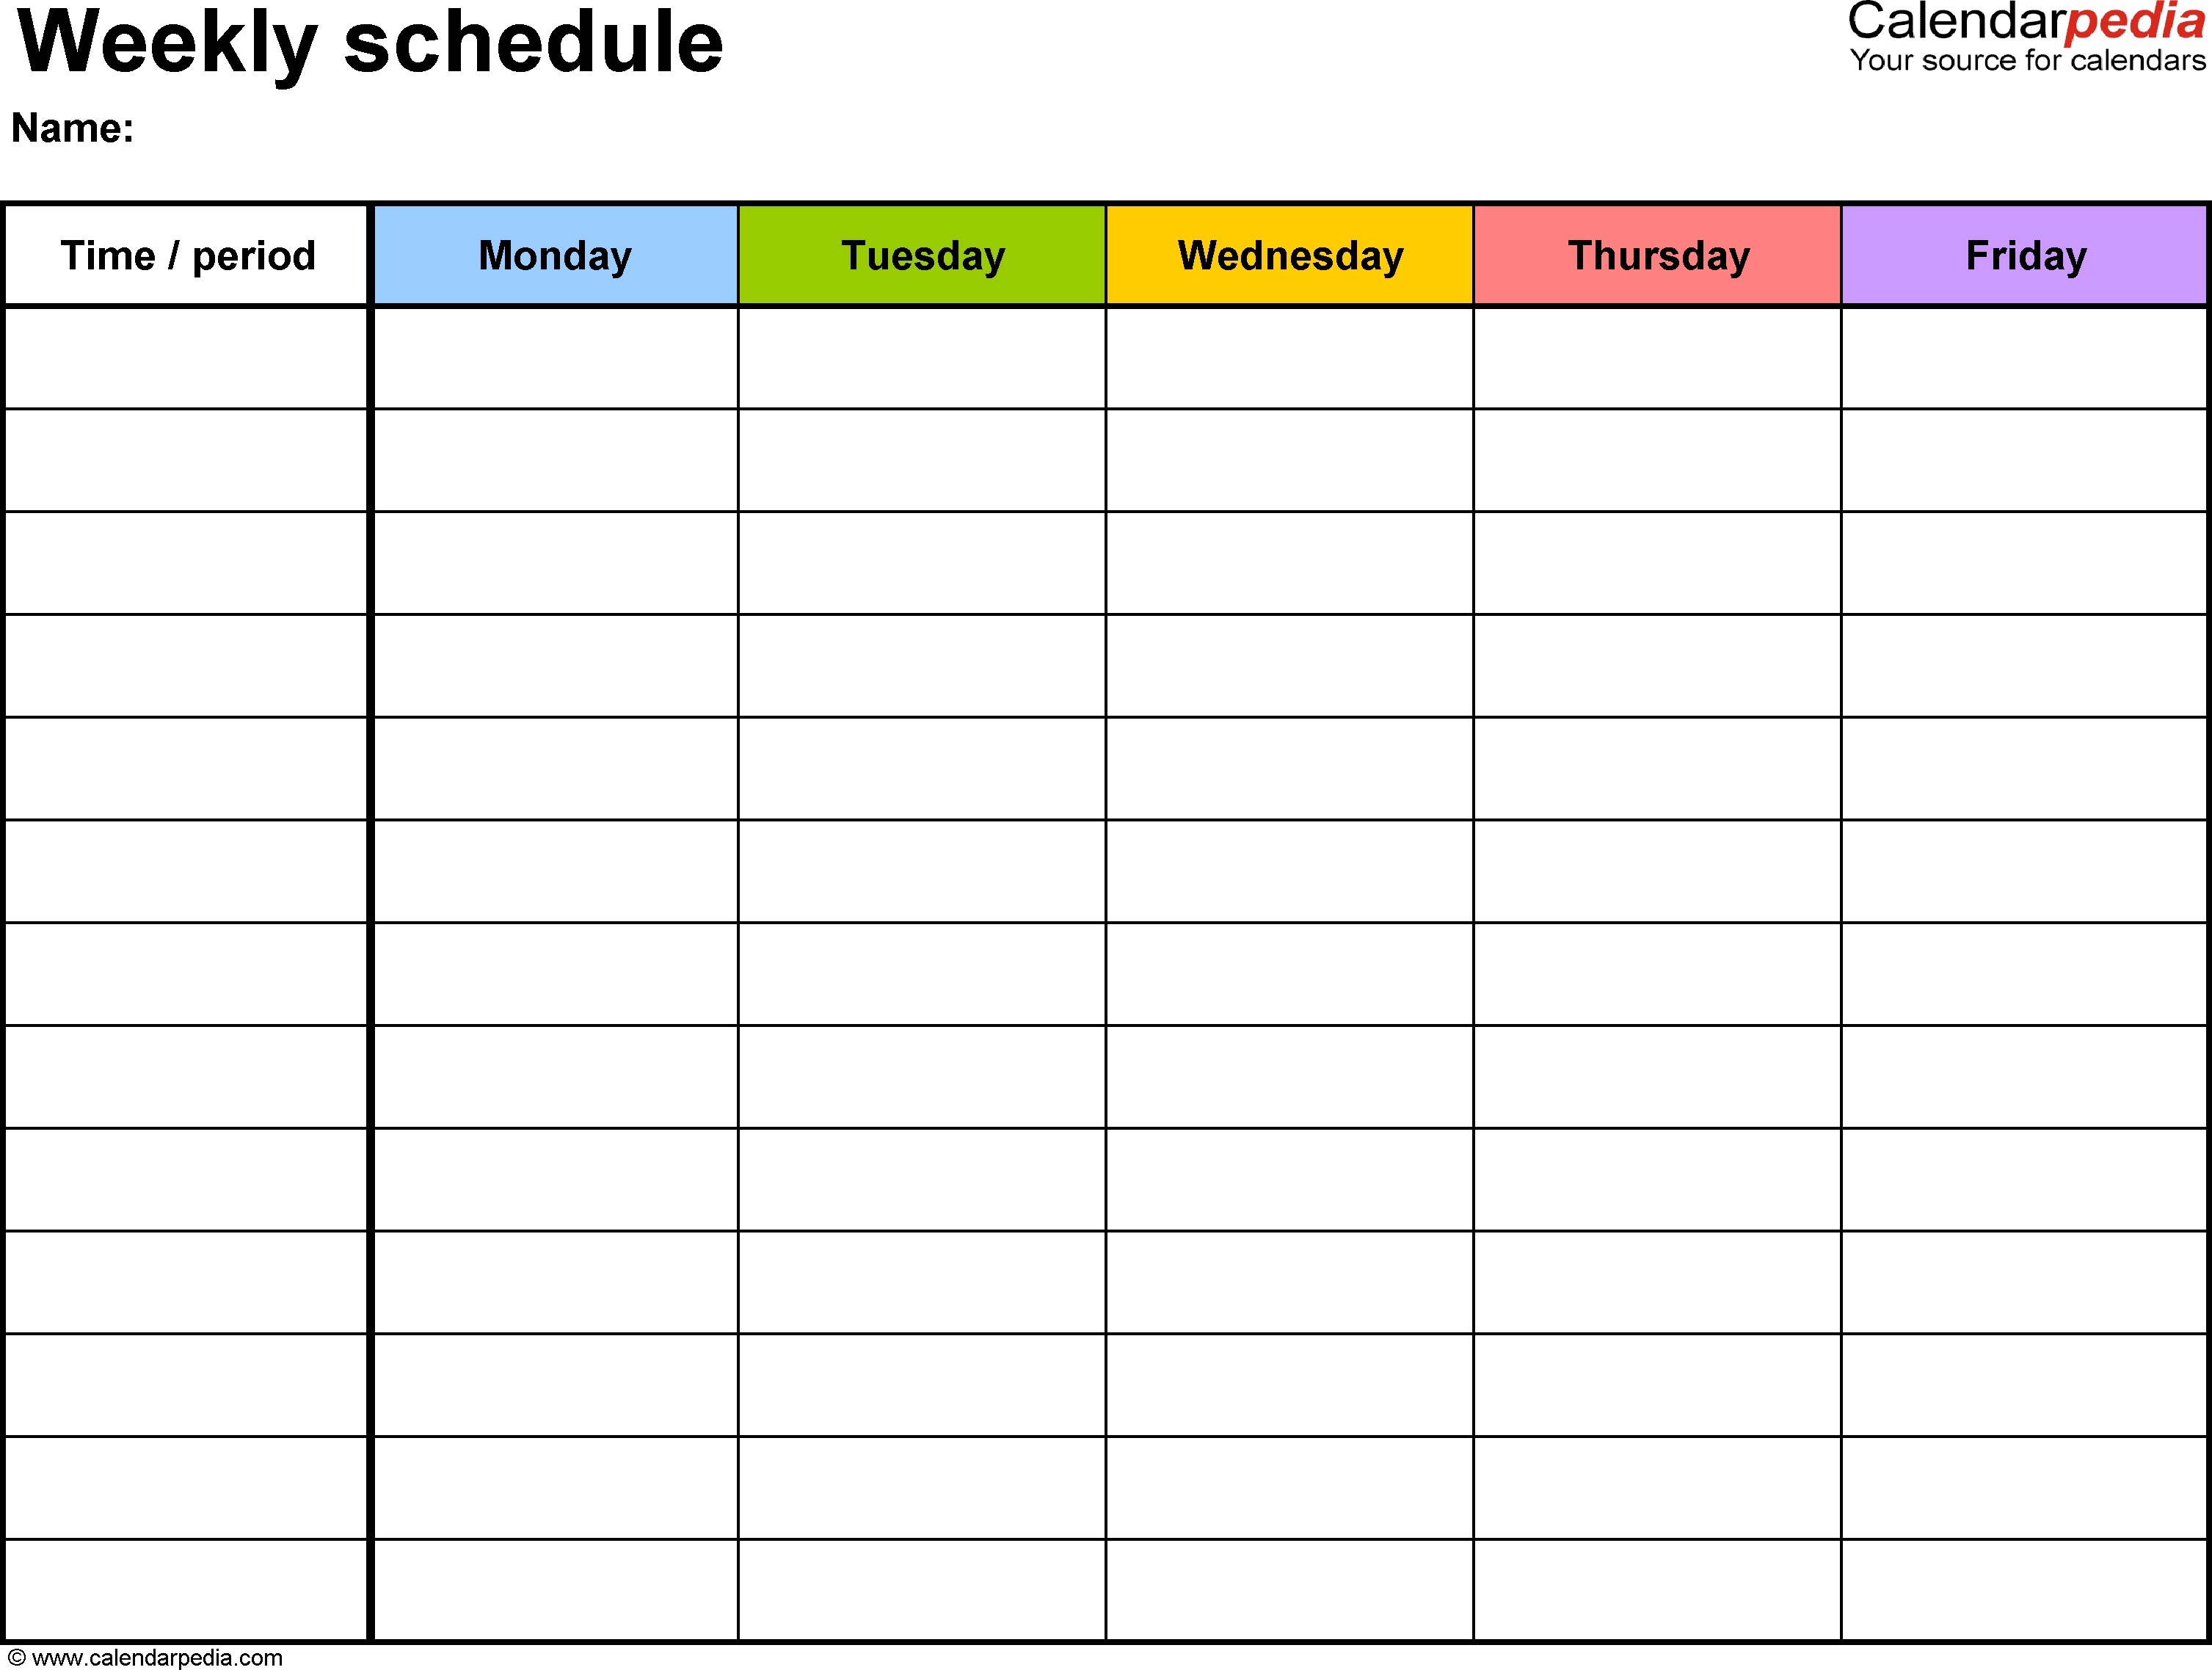 Free Weekly Schedule Templates For Pdf - 18 Templates inside Printable Weekly Calendar Monday Start